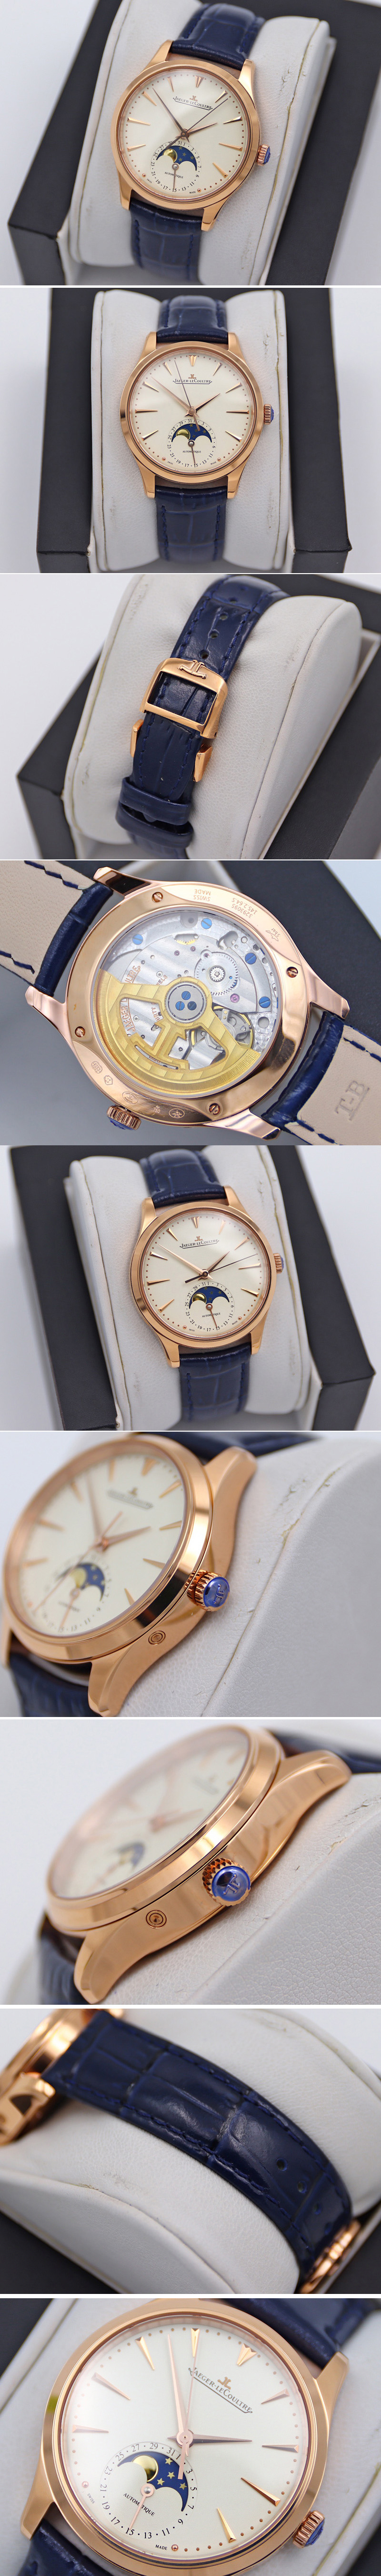 Replica Jaeger-LeCoultre Master Ultra Thin Moonphase RG/LE White Dial Blue Leather Strap TW MY9015 to Cal.925